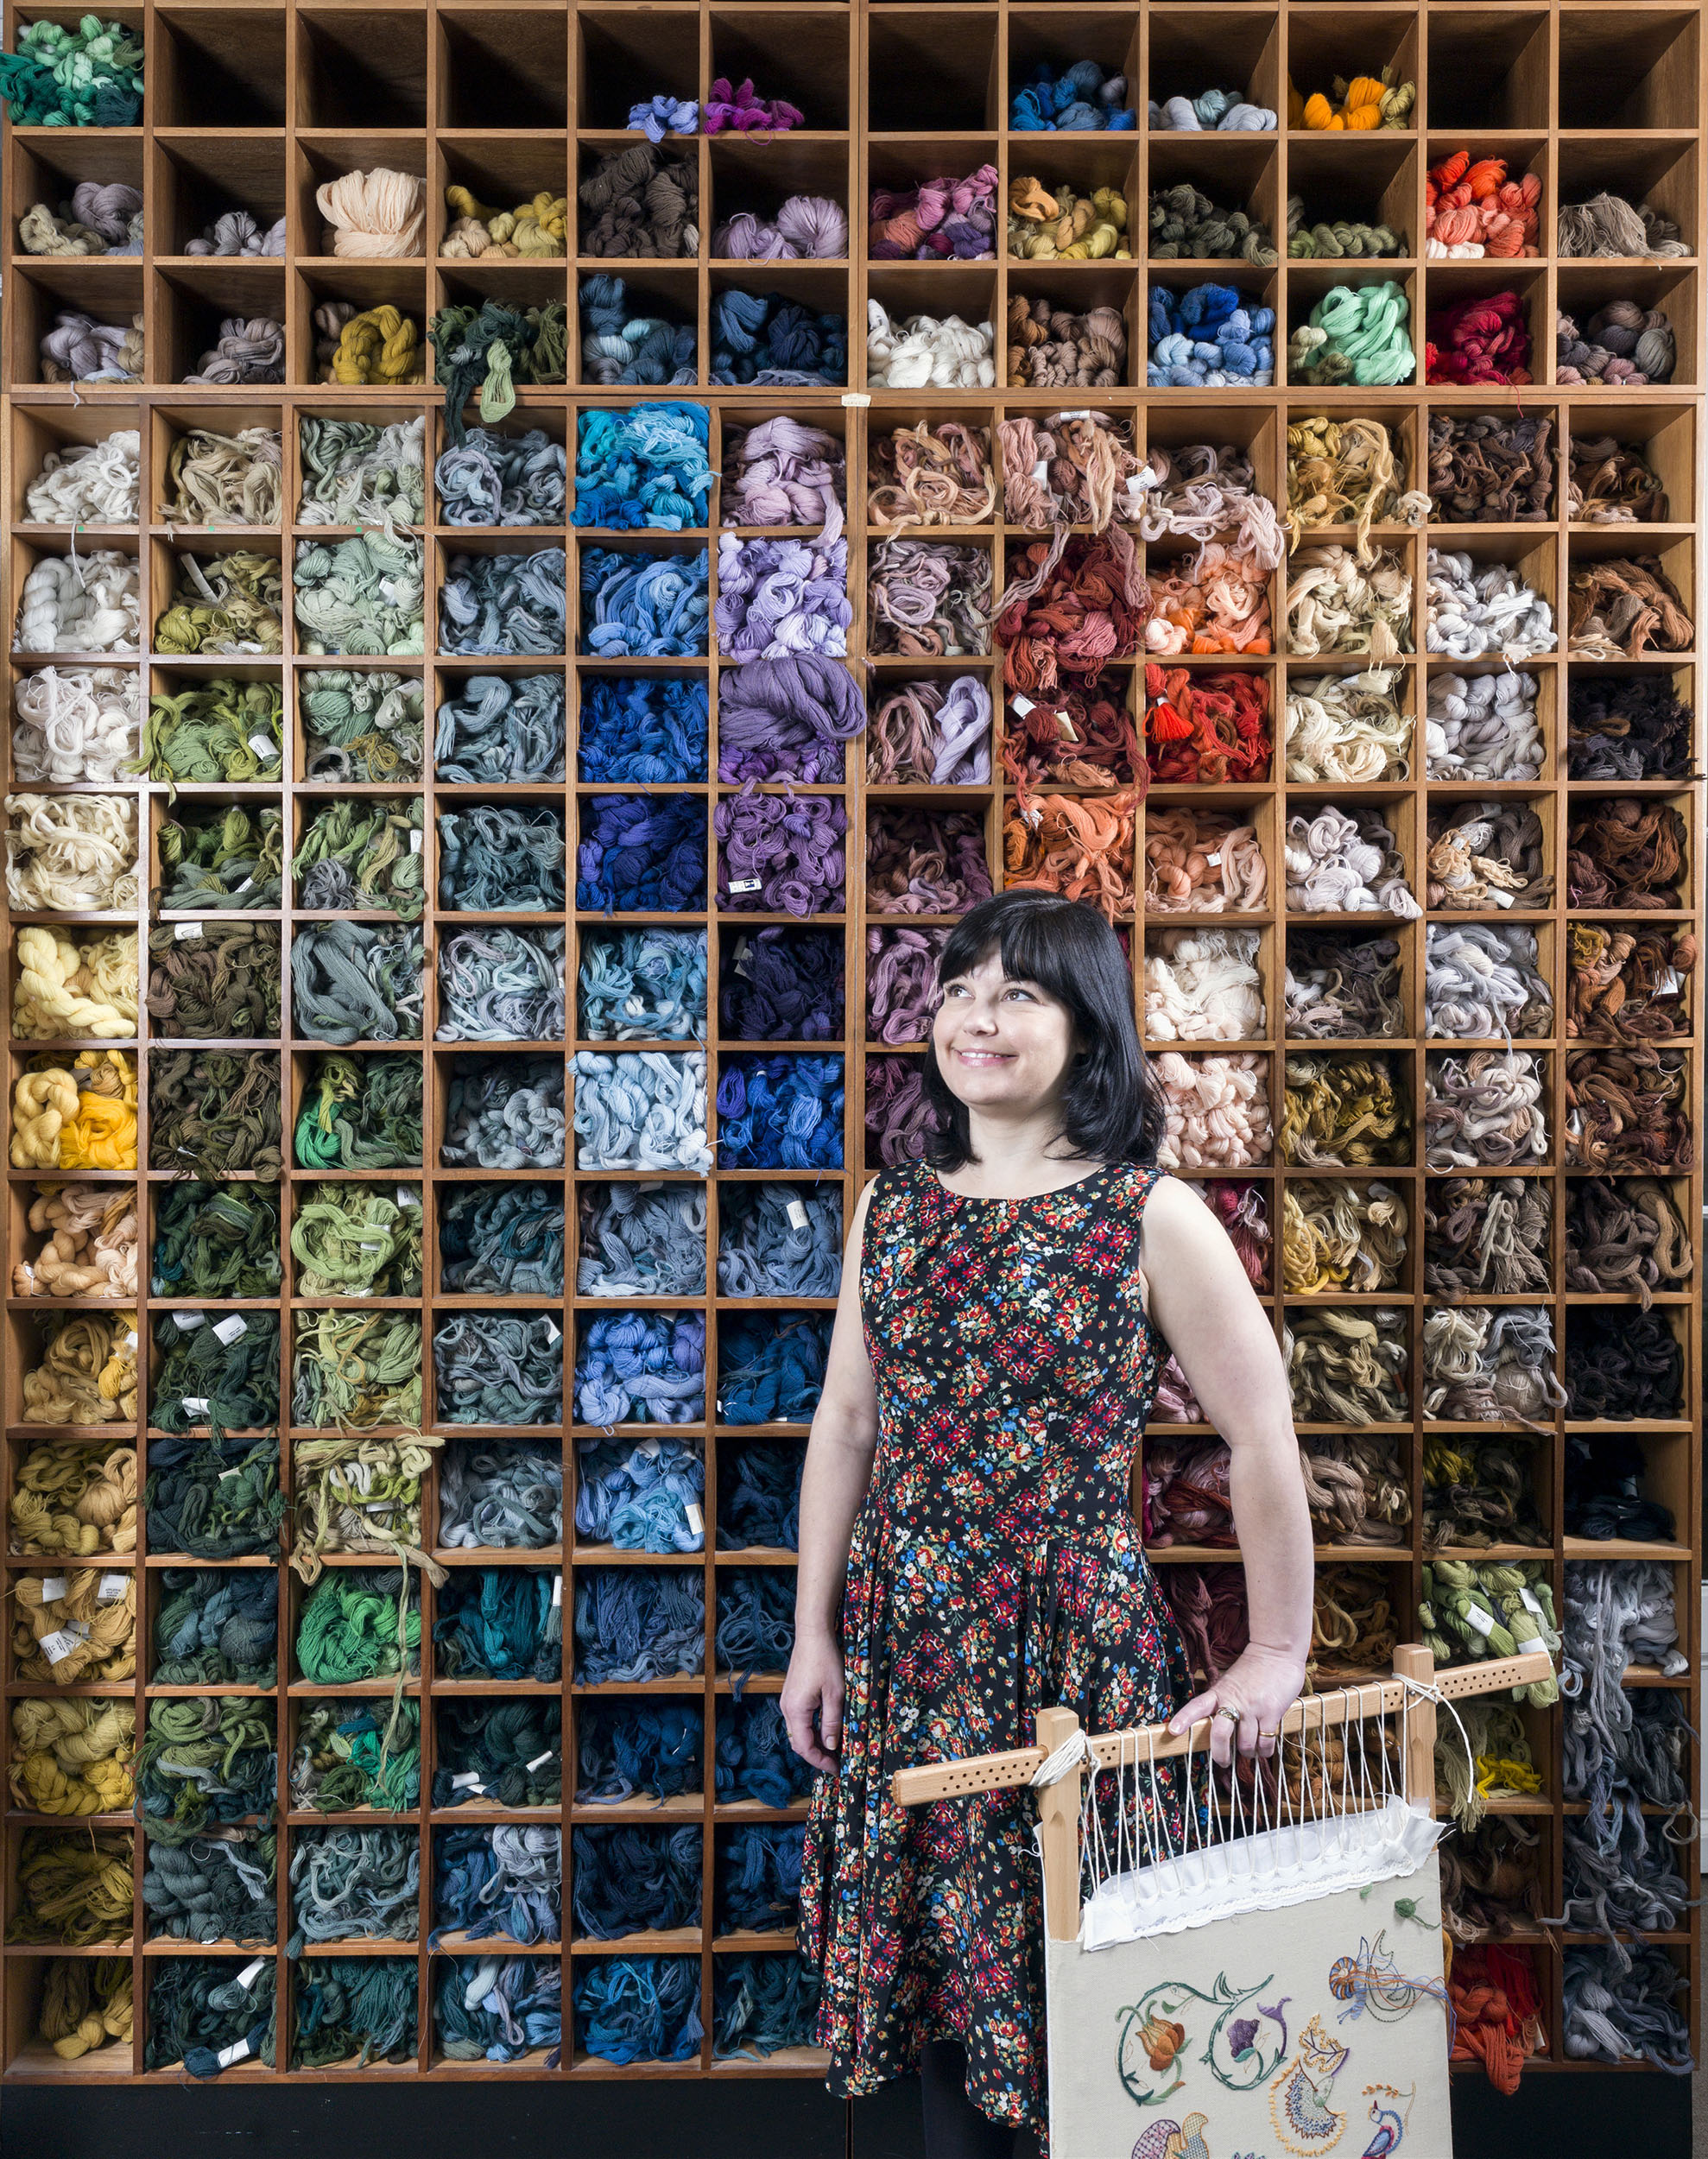 Young woman photographed in front of box shelving full of carefully organised embroidery thread.